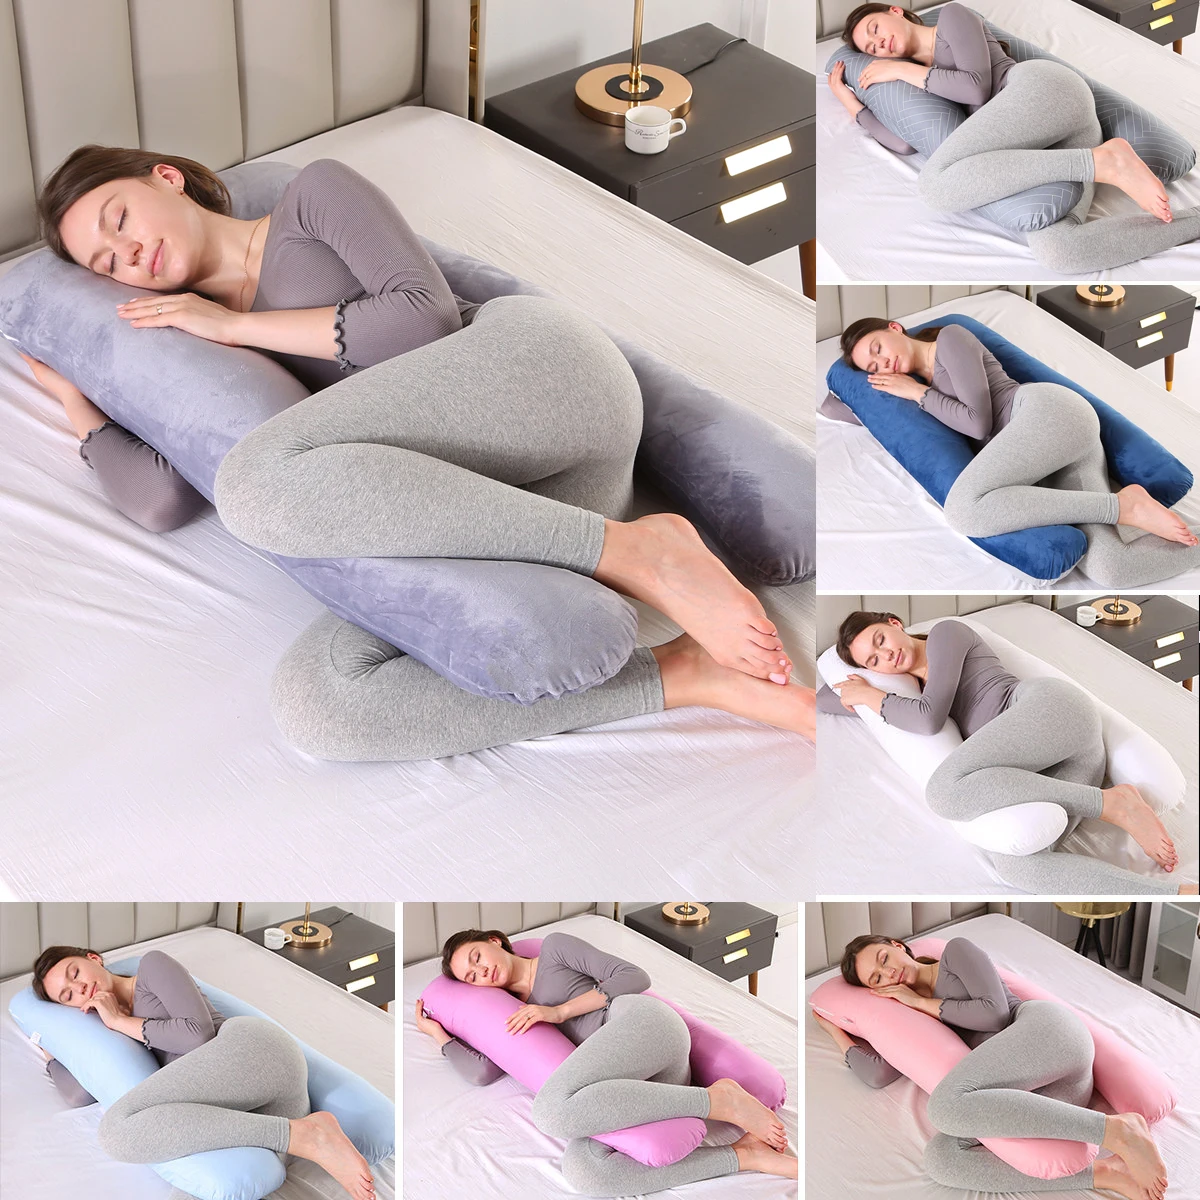 U-shaped Pregnancy Pillows Comfortable Maternity Belt Body Pregnancy Pillow Women Pregnant Side Sleepers Cushion for Bed